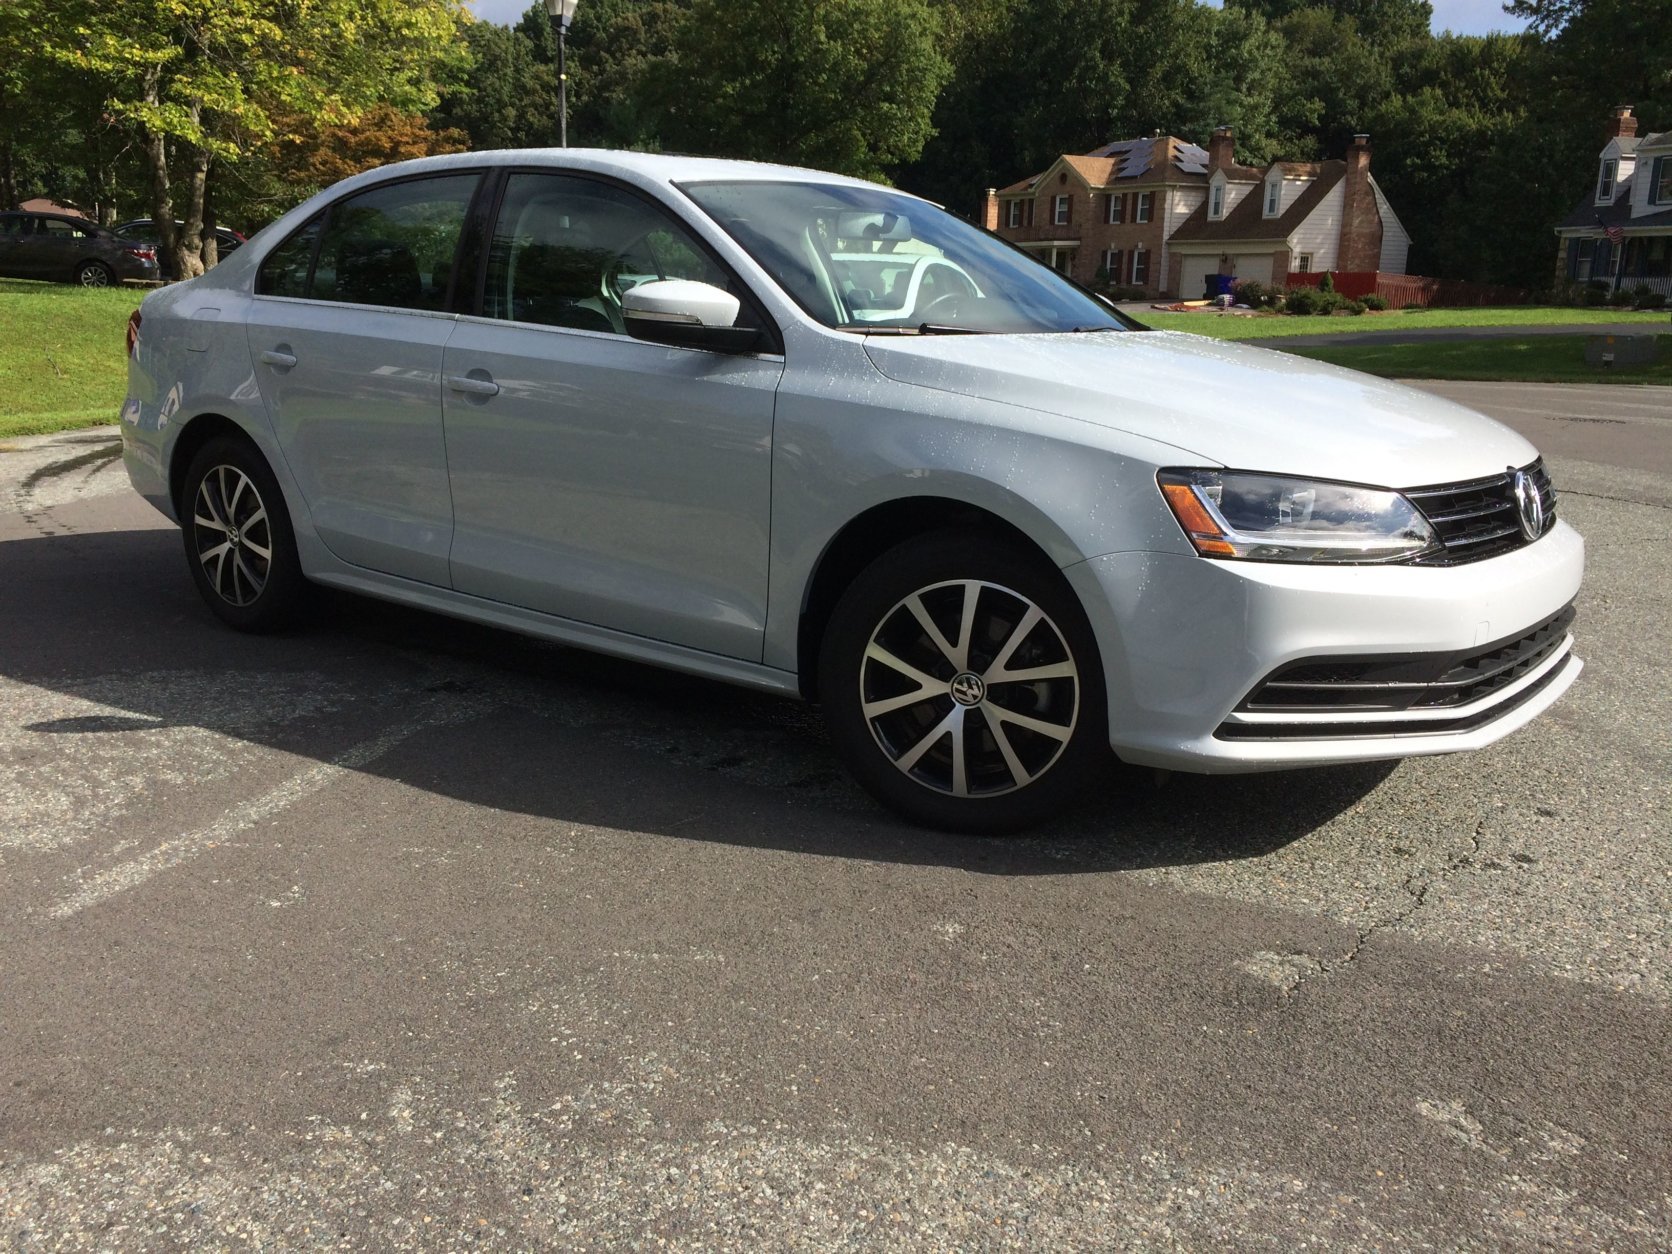 When you want to buy a compact sedan you usually have to sacrifice interior space for better fuel economy. But WTOP's Mike Parris said the Volkswagen Jetta has the interior space of a larger midsize sedan and it won't break the bank either. (WTOP/Mike Parris) 